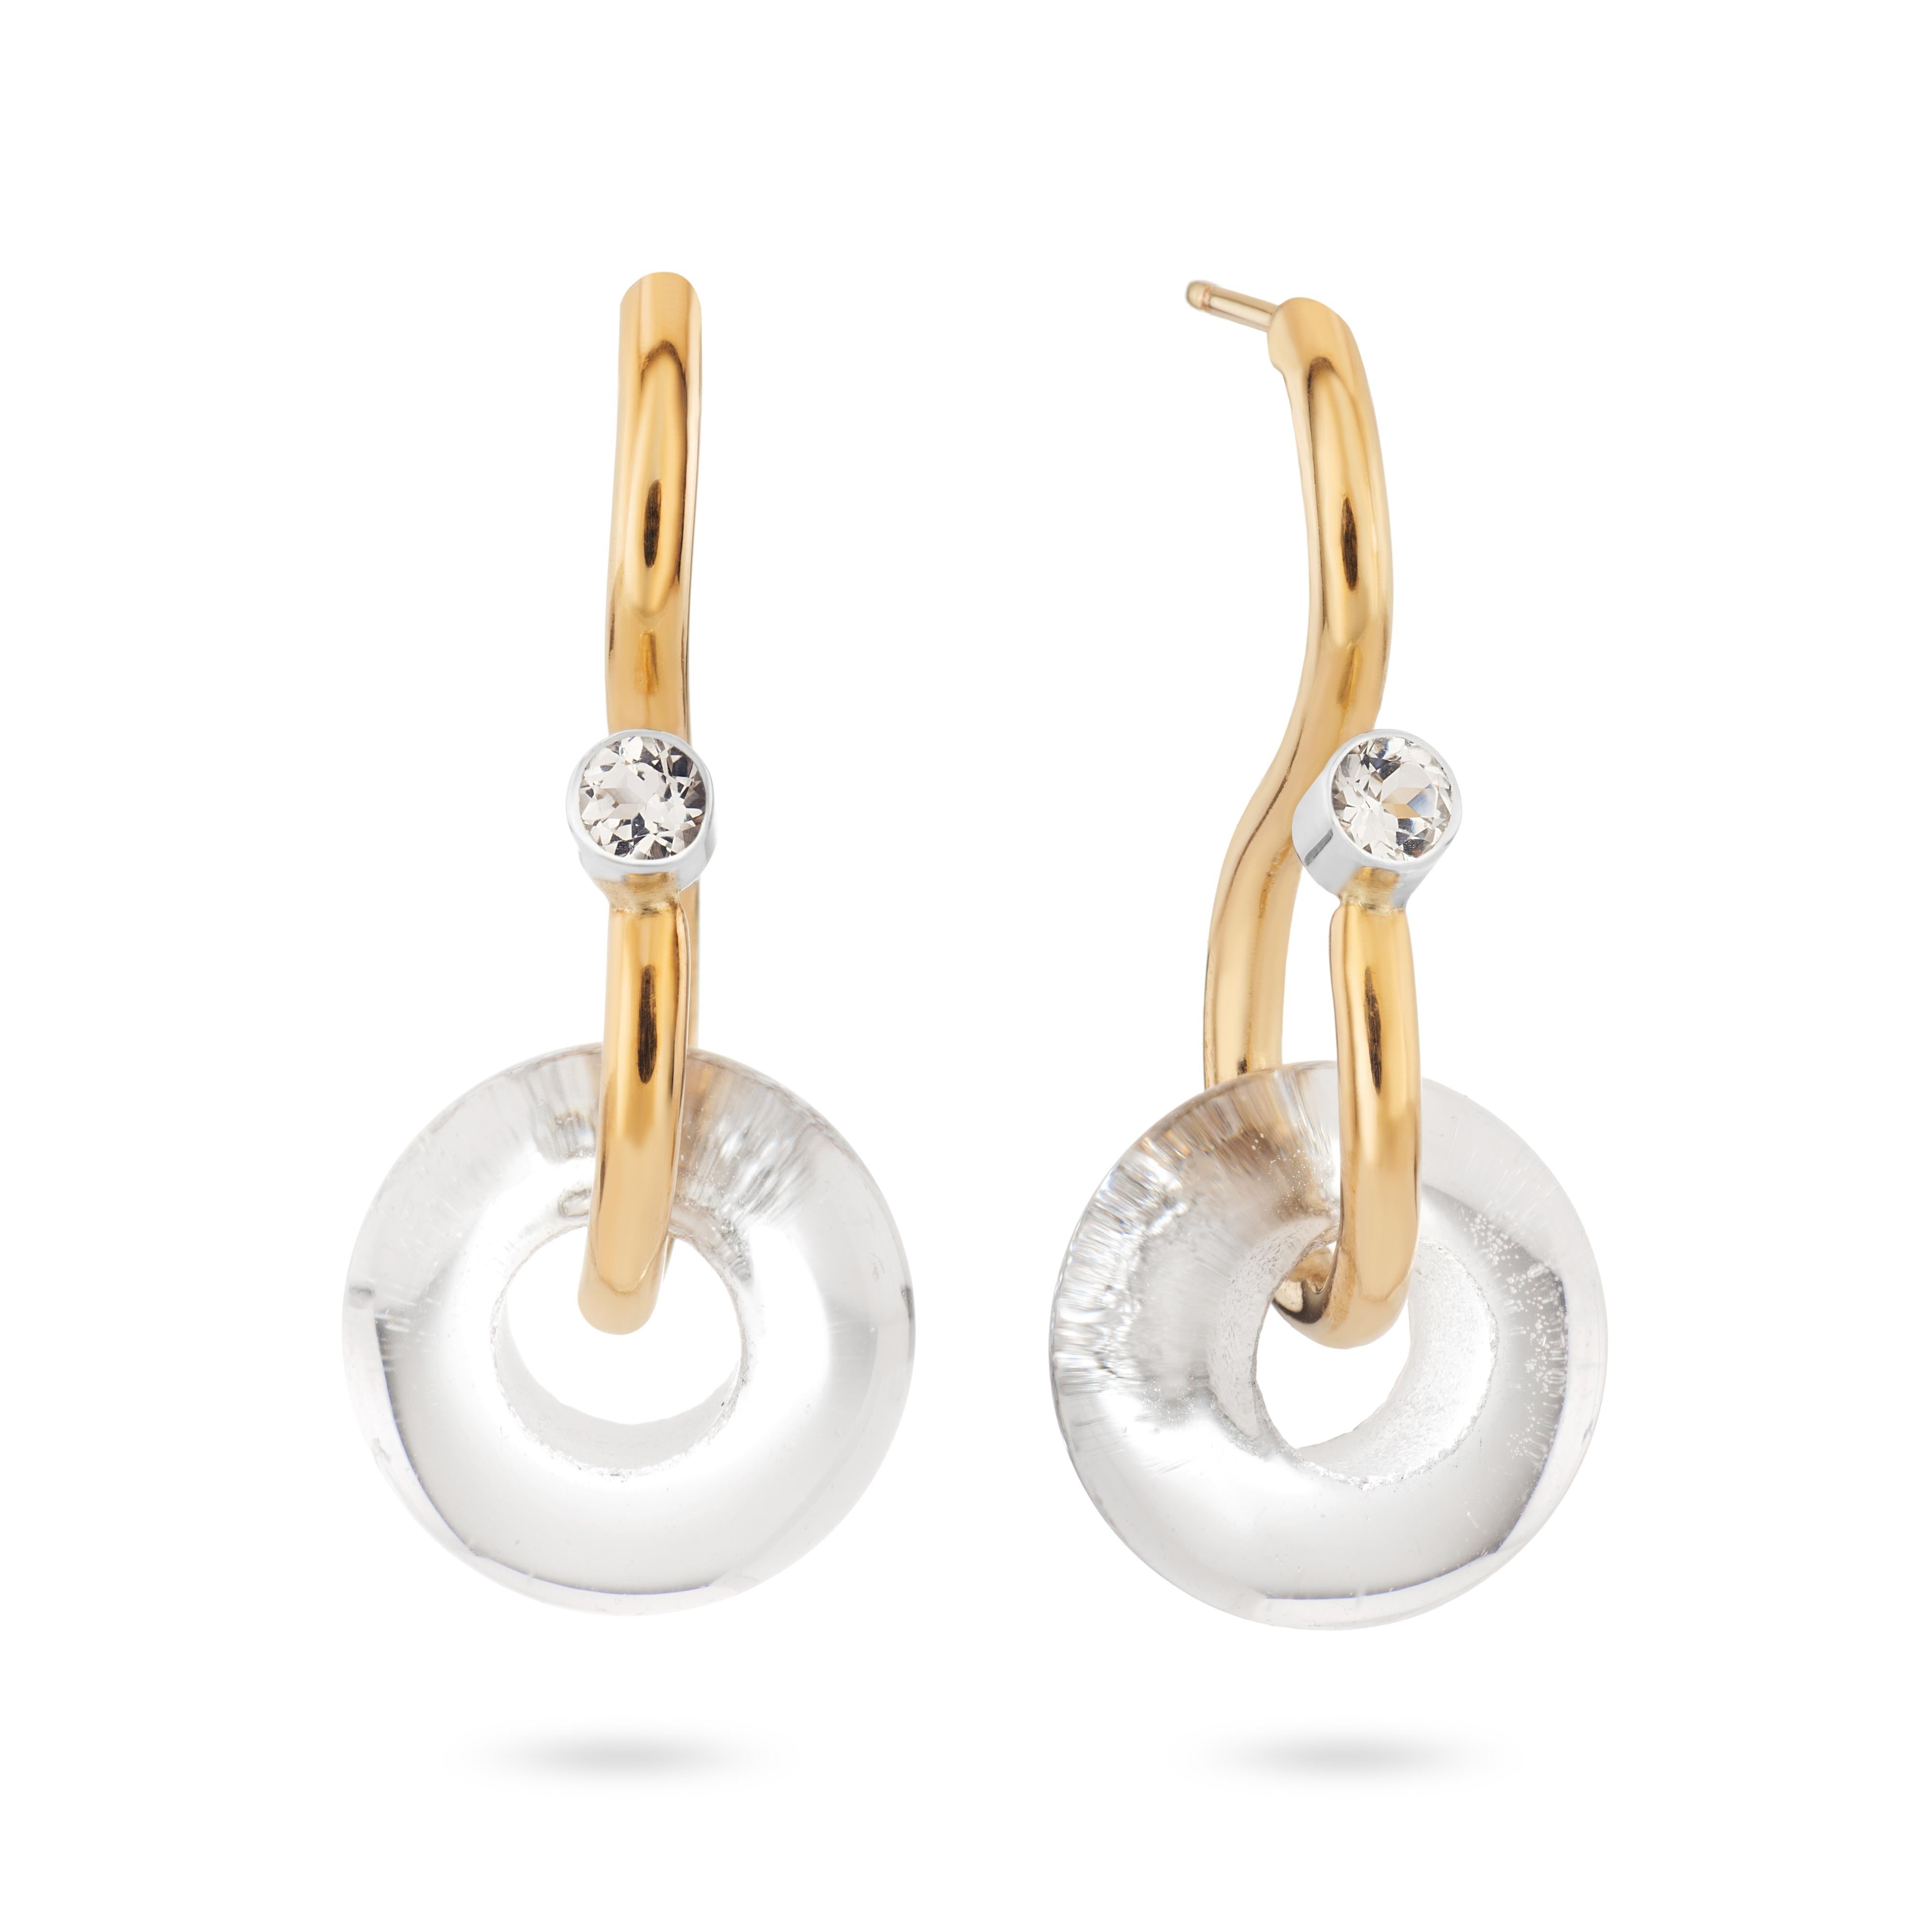 A modern style, the poise earring creates the illusion of depth through the curvature and formation of the wire. Inspired by the S shaped chain link created for the poise necklace, the signature poise earrings featuring crystal quartz and white